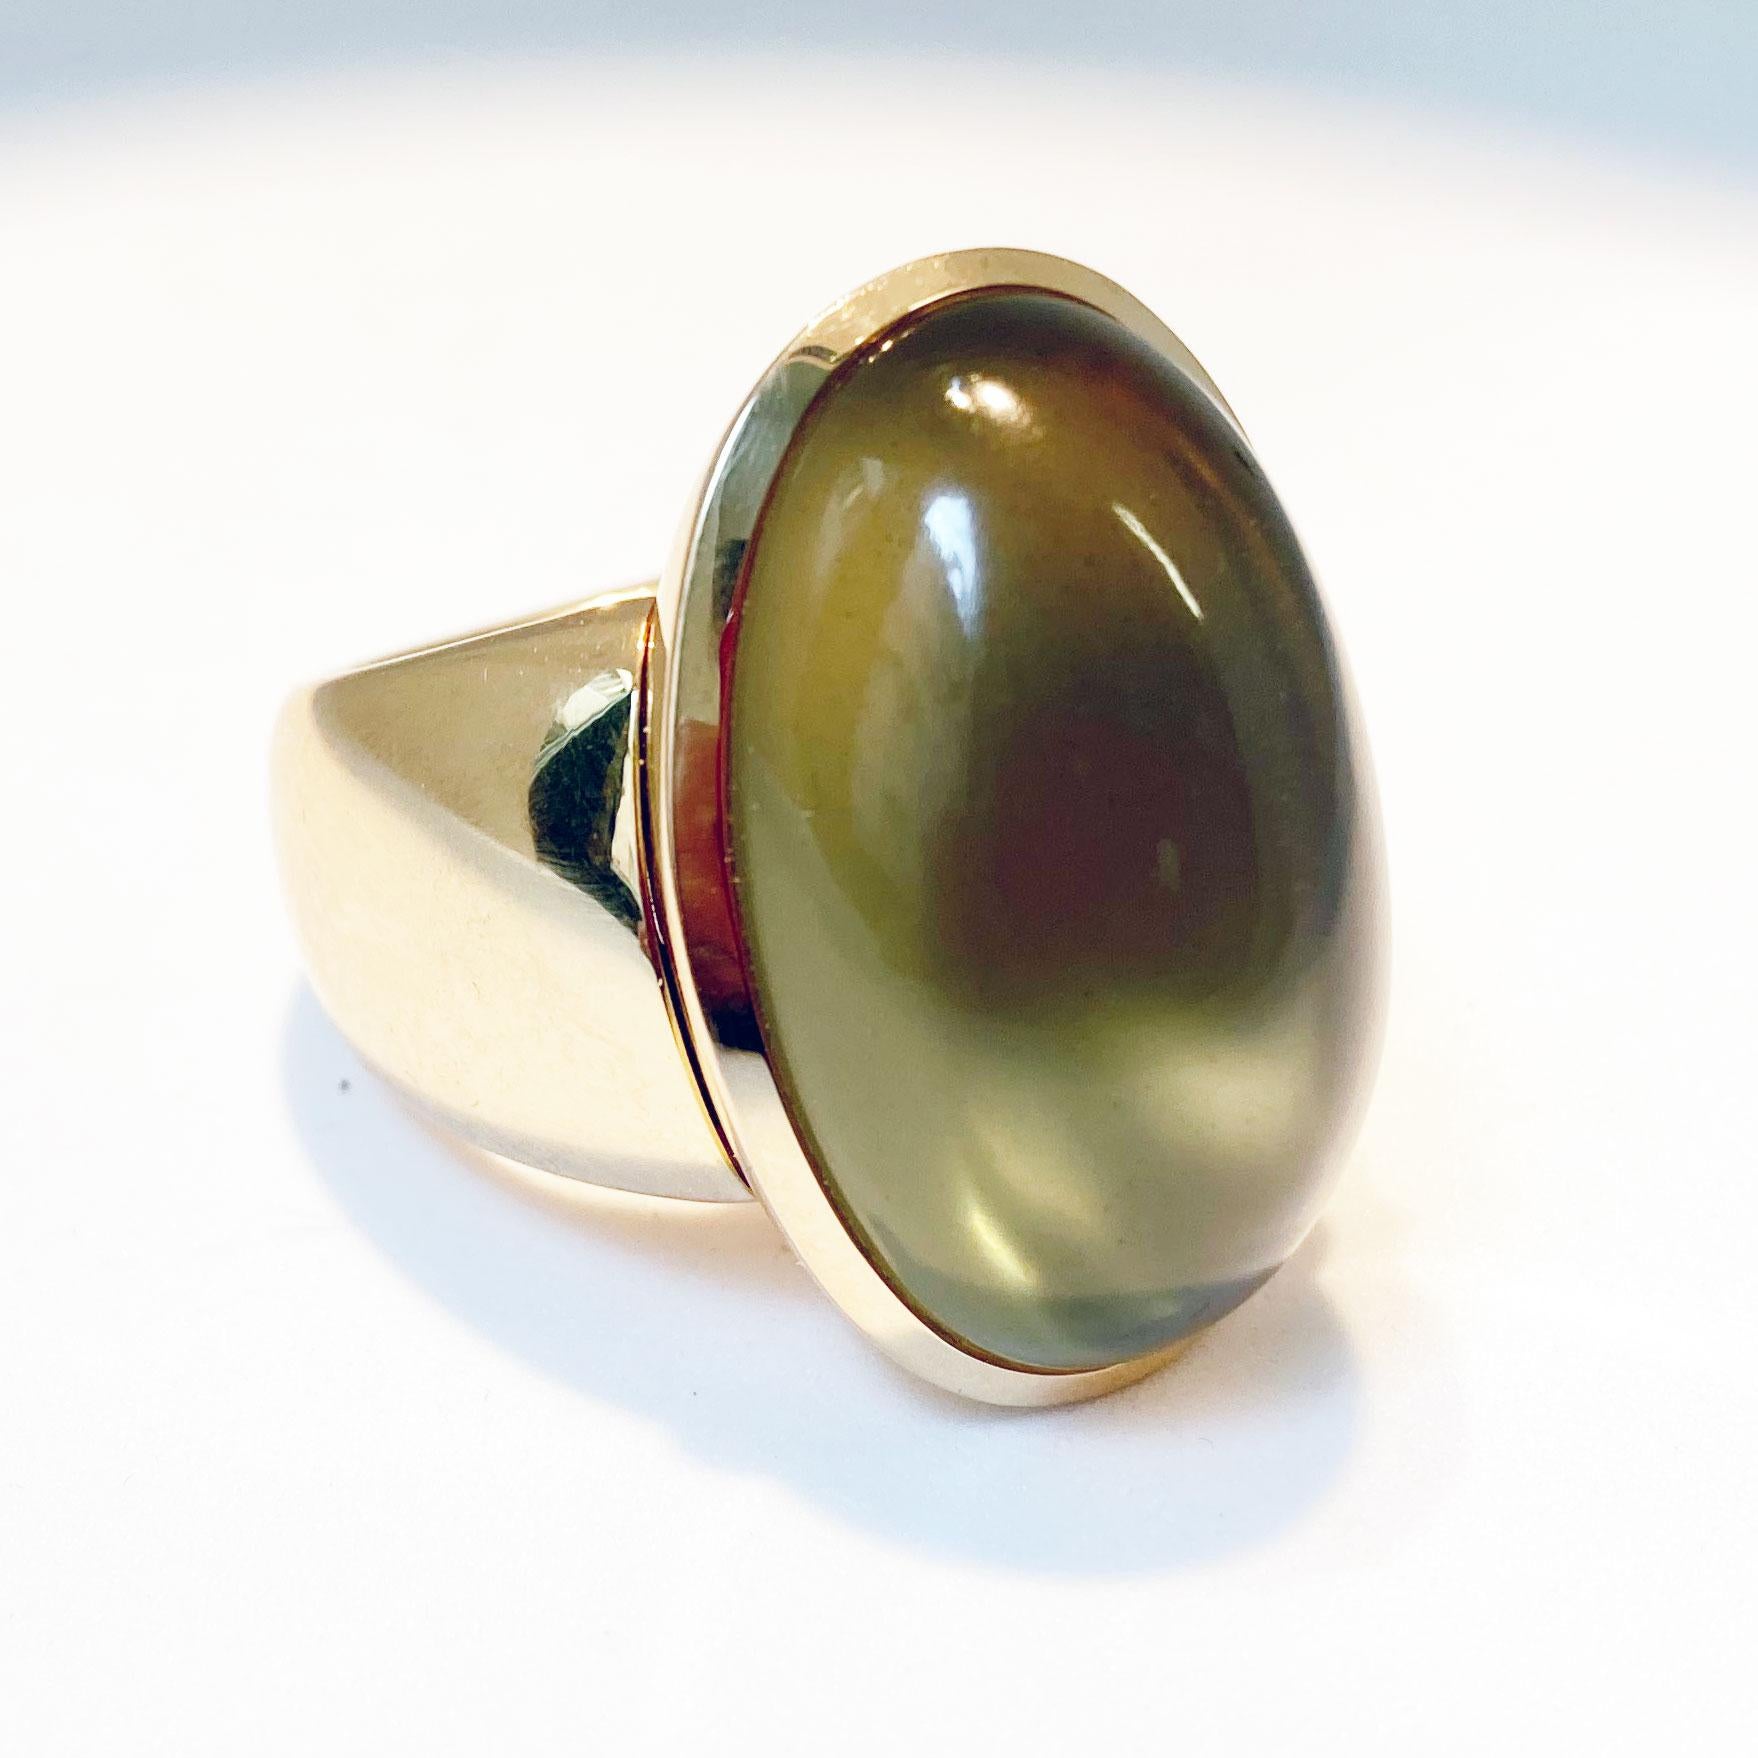 This stunning Ring convinces with pure simlicity.
As a fascinating and alluring centre part a bezel set ,semi translucent ,yellow-greenish Moonstone cabochon with a hefty weight of  34.75 ct.
The mystic shine is moving allover the stone.
Stone